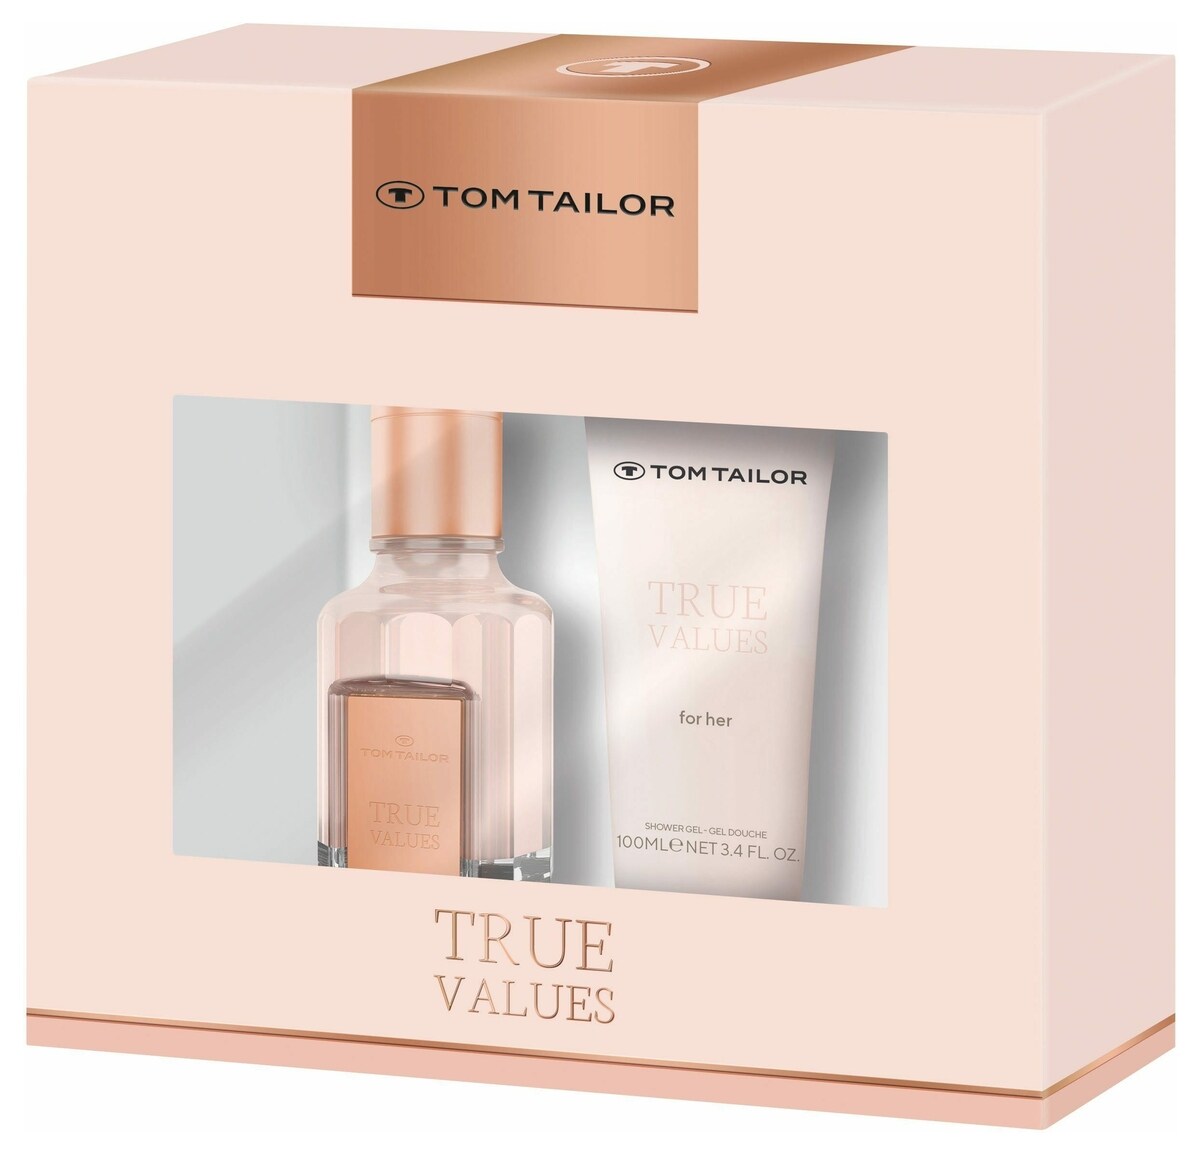 Facts Her True » Values & by Perfume for Tailor Reviews Tom